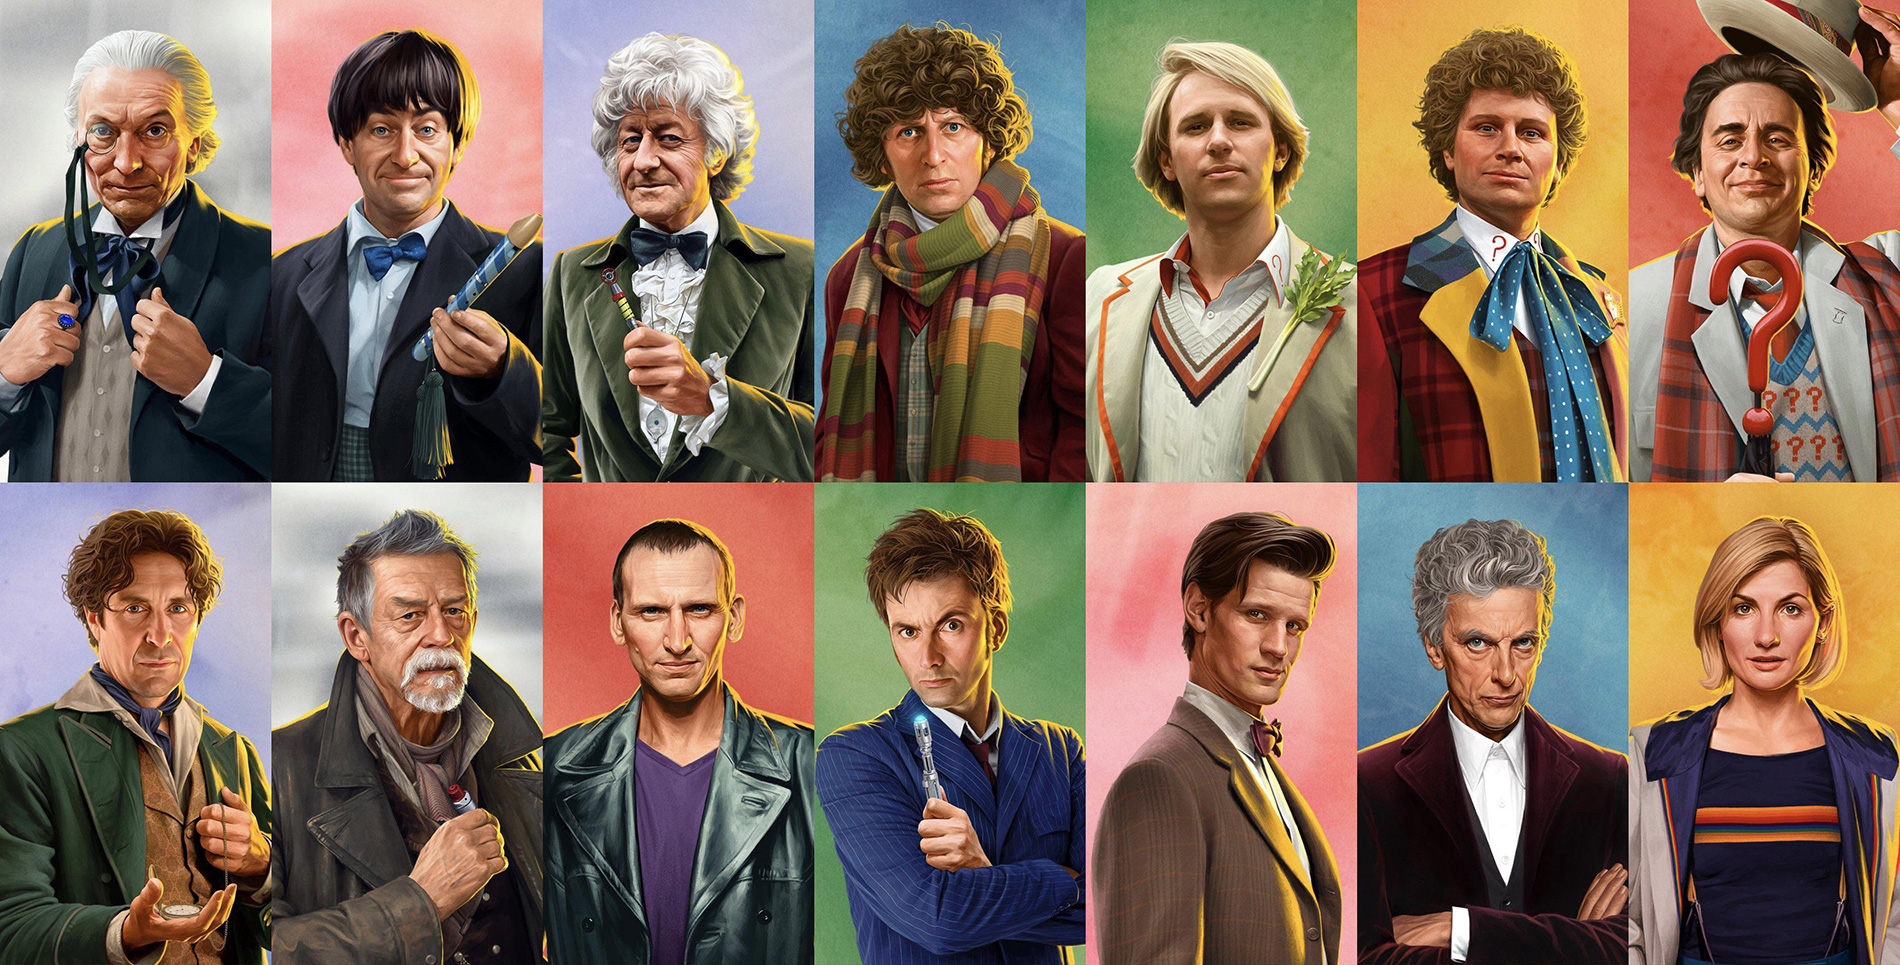 JEREMY ENECIO BBC RELEASES NEW CHARACTER PORTRAITS OF THE DOCTORS